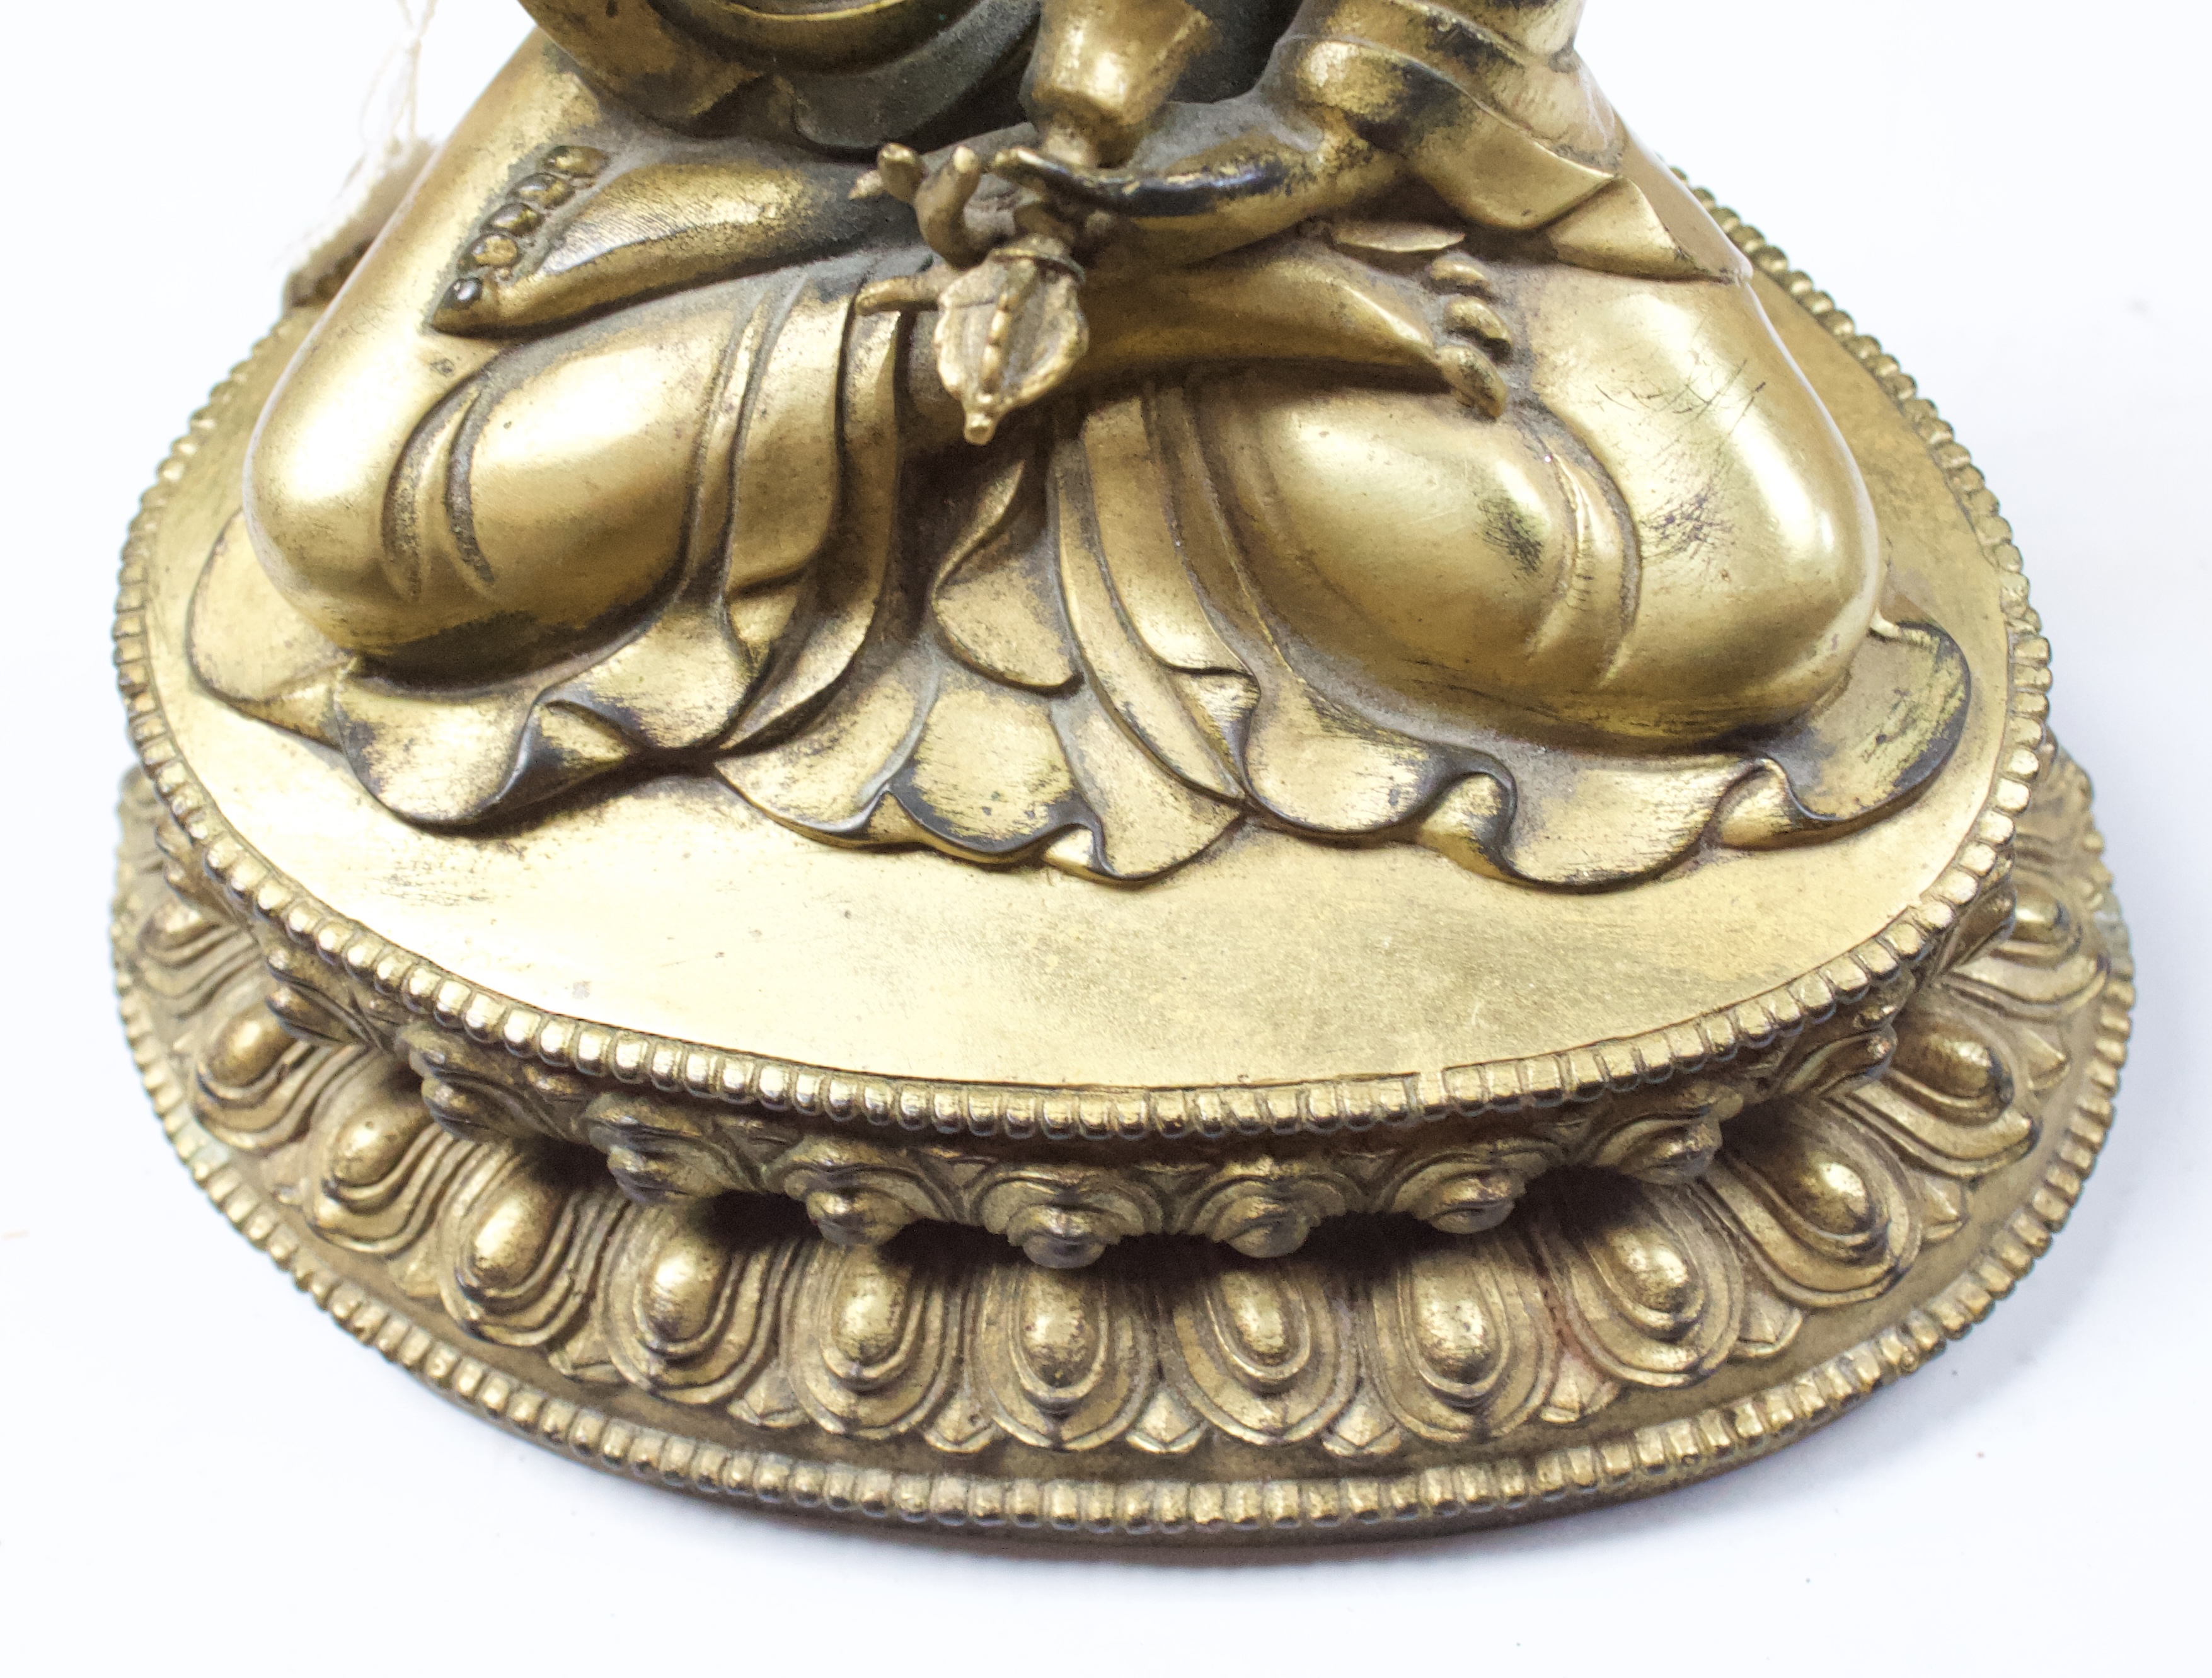 A Gilt-bronze Tibetan style Buddha, seated in lotus position and holding a vajra and meditiation - Image 6 of 14